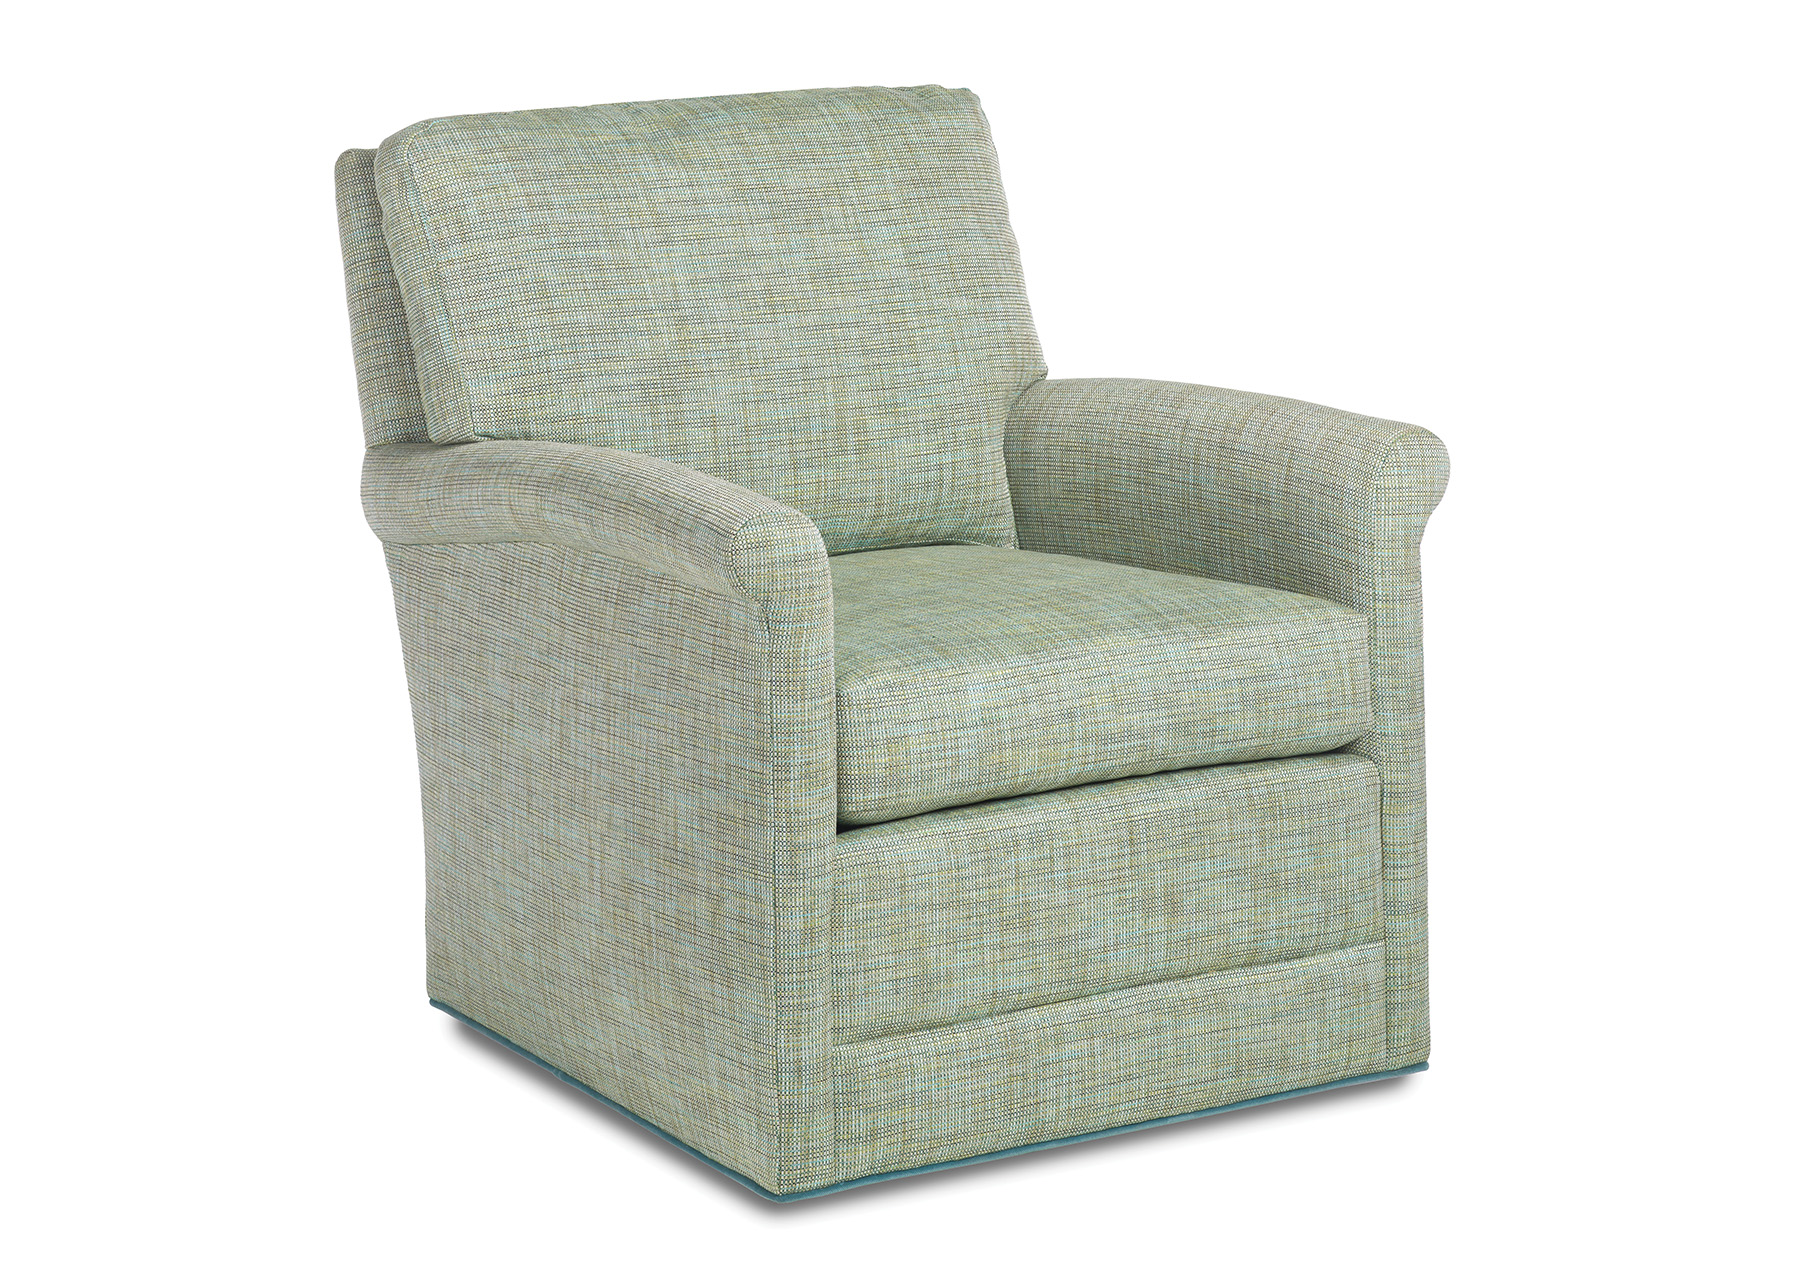 JACOBY SWIVEL CHAIR